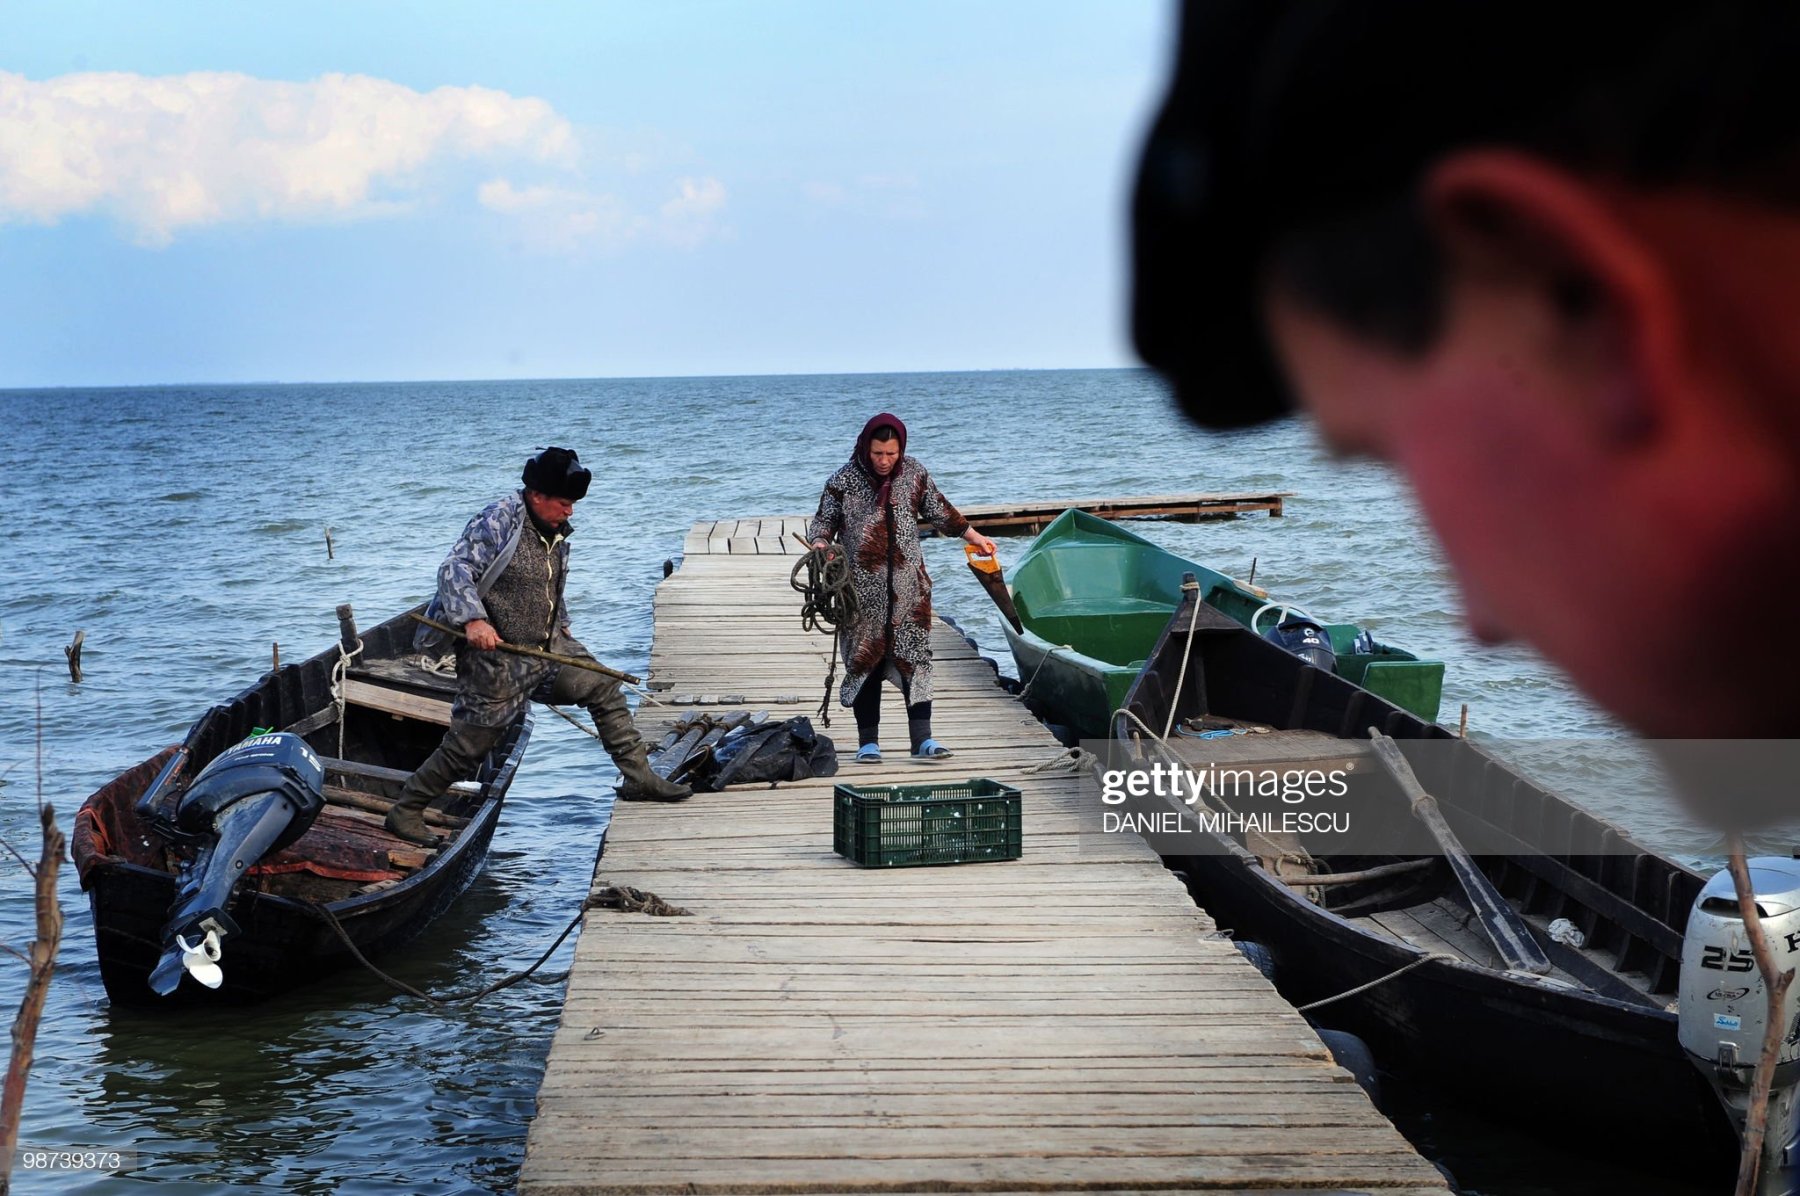 TO GO WITH AFP STORY BY Isabelle WESSELINGH A Lipovan fisherman is helped by his wife as he unloads belongings from his boat on lake Razelm in Sarichioi village, 250kms east of Bucharest, on April 3, 2010. The Lipovans fled religious persecutions in Russia 300 years ago. Exiled to the Danube delta, in a far-flung corner of Romania, they lived through Ottoman domination and a communist dictatorship.Lipovans are officially about 38,000 in Romania, a country of 22 million, but they are most likely around 100,000 according to historians and church registers. AFP PHOTO DANIEL MIHAILESCU (Photo credit should read DANIEL MIHAILESCU/AFP via Getty Images)